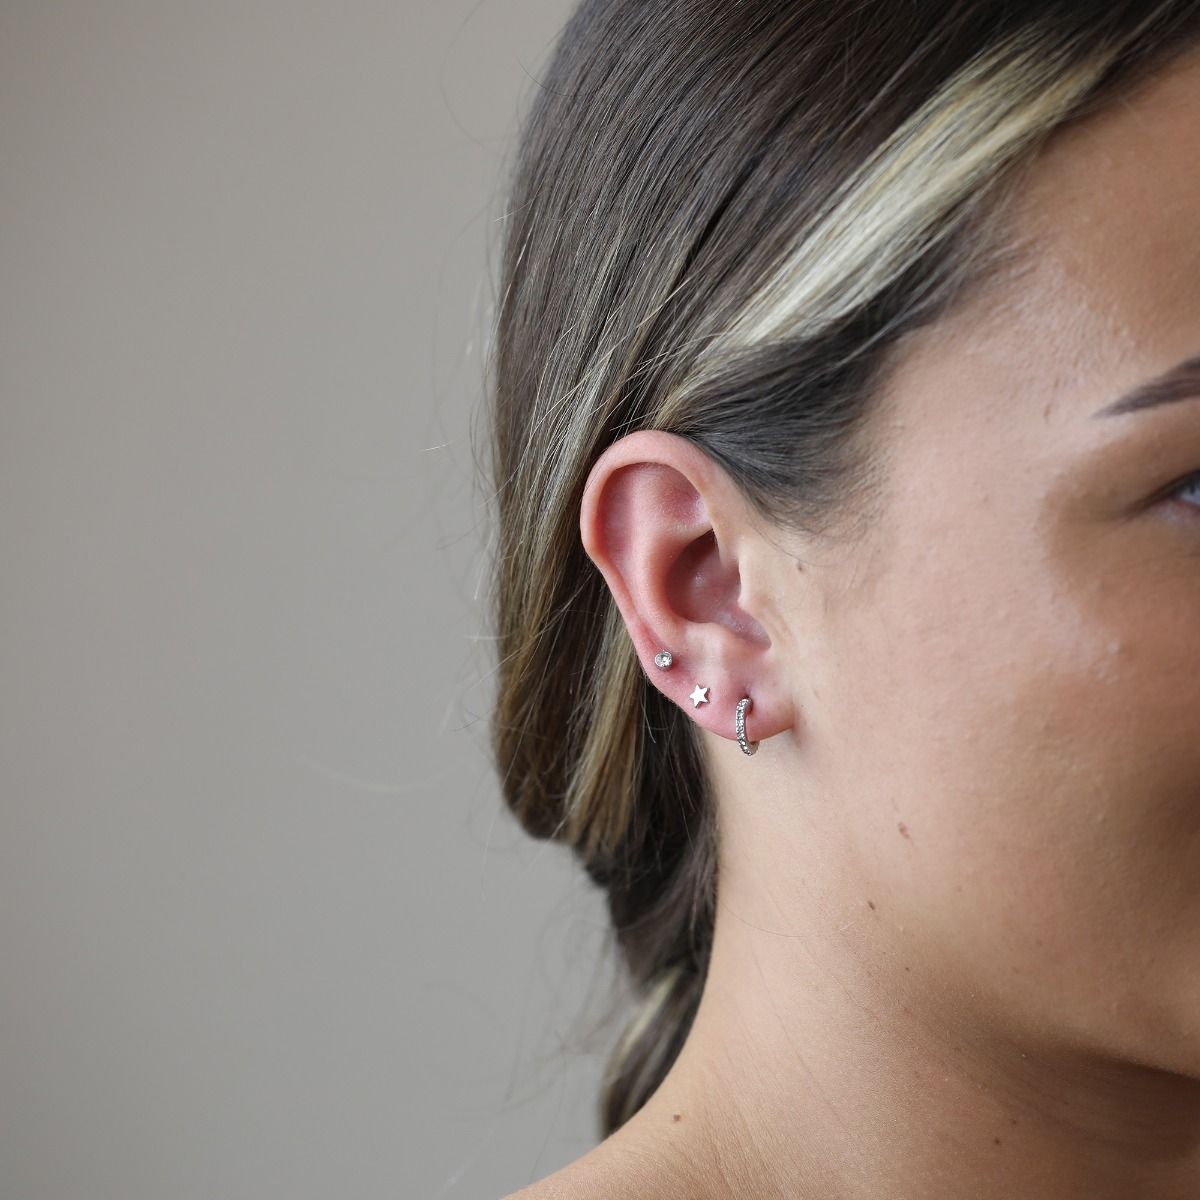 Elevate your earring game with this exquisite Set of Four Imitation Rhodium Earrings. Featuring a variety of styles, including plain studs, playful pineapple designs, sparkling crystal studs, and trendy hoop earrings, this collection offers versatility an